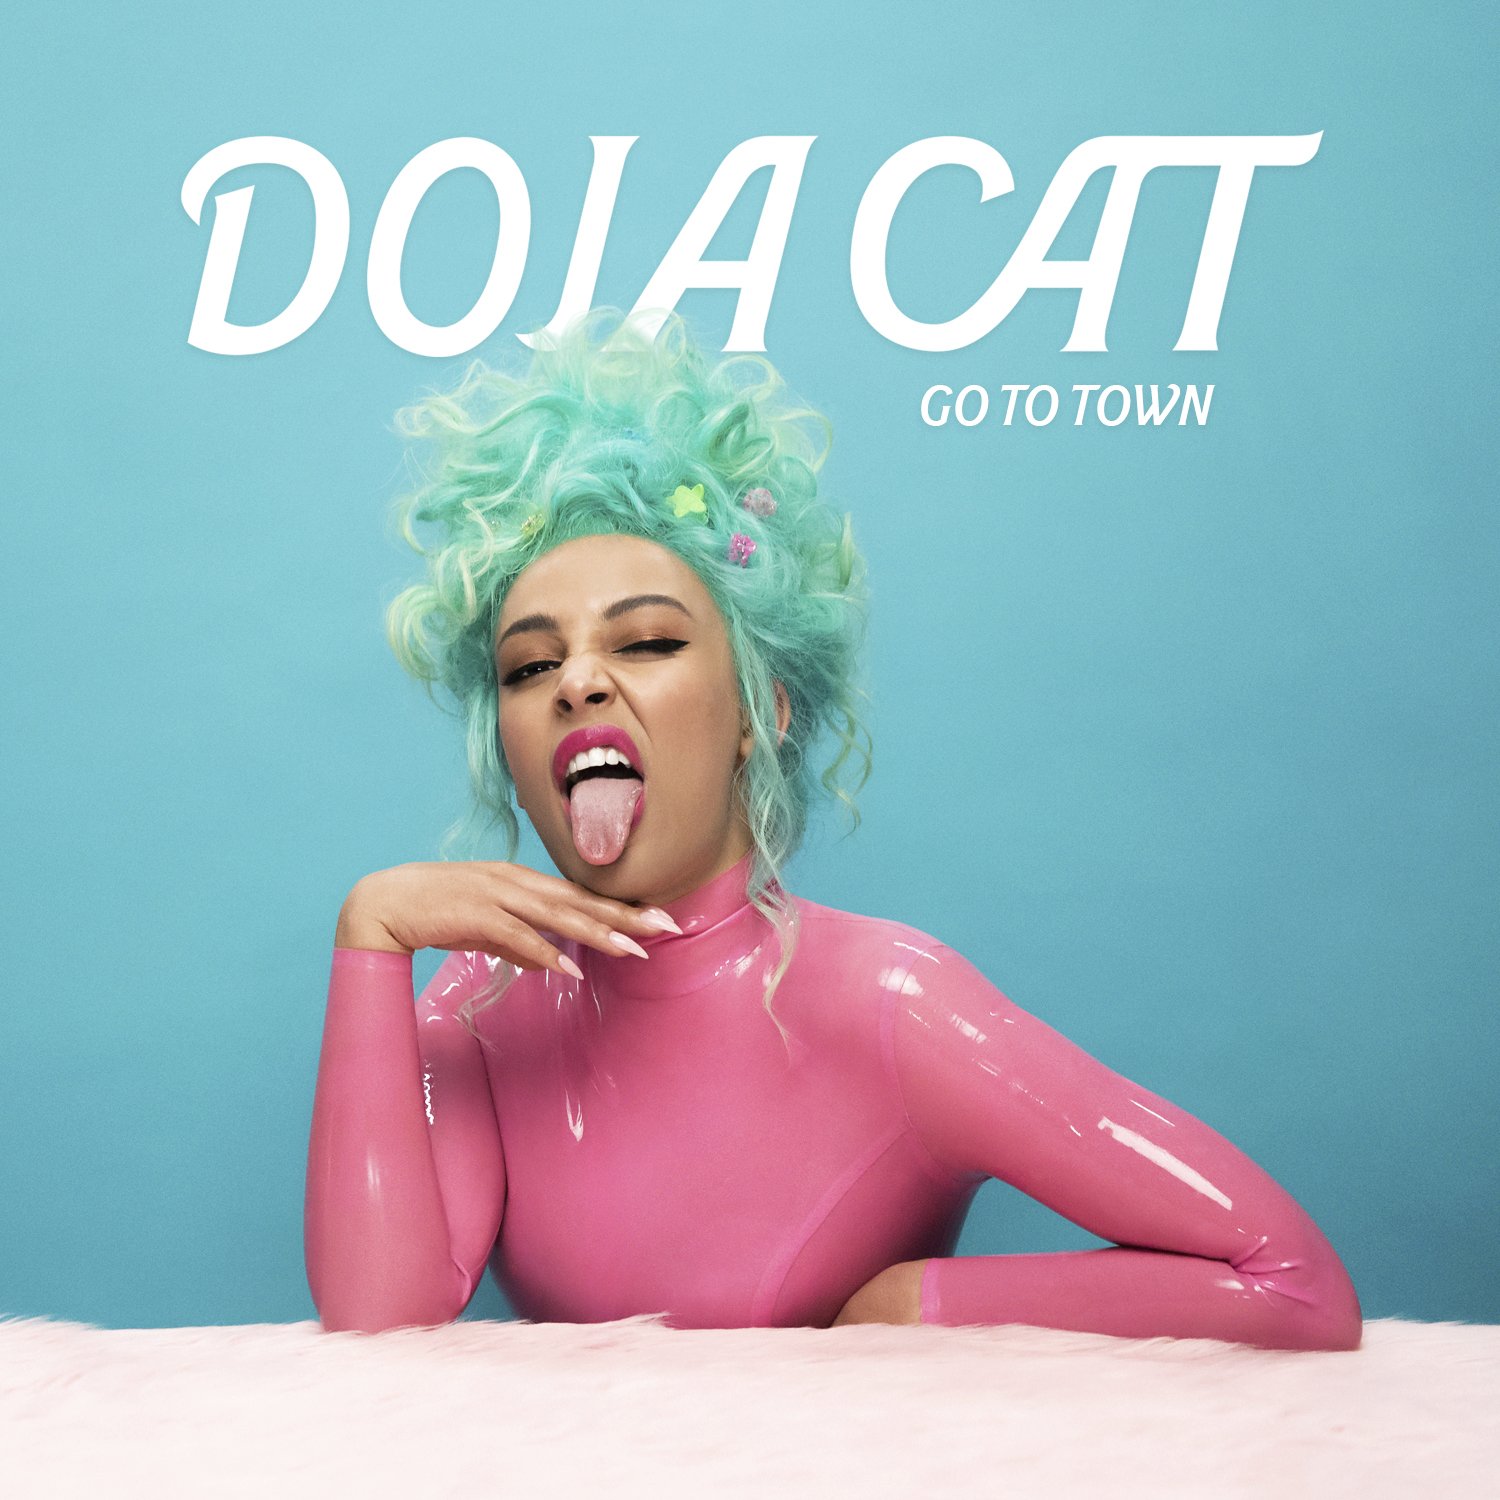 Doja Cat Releases "Go To Town" Track and Video RCA Records